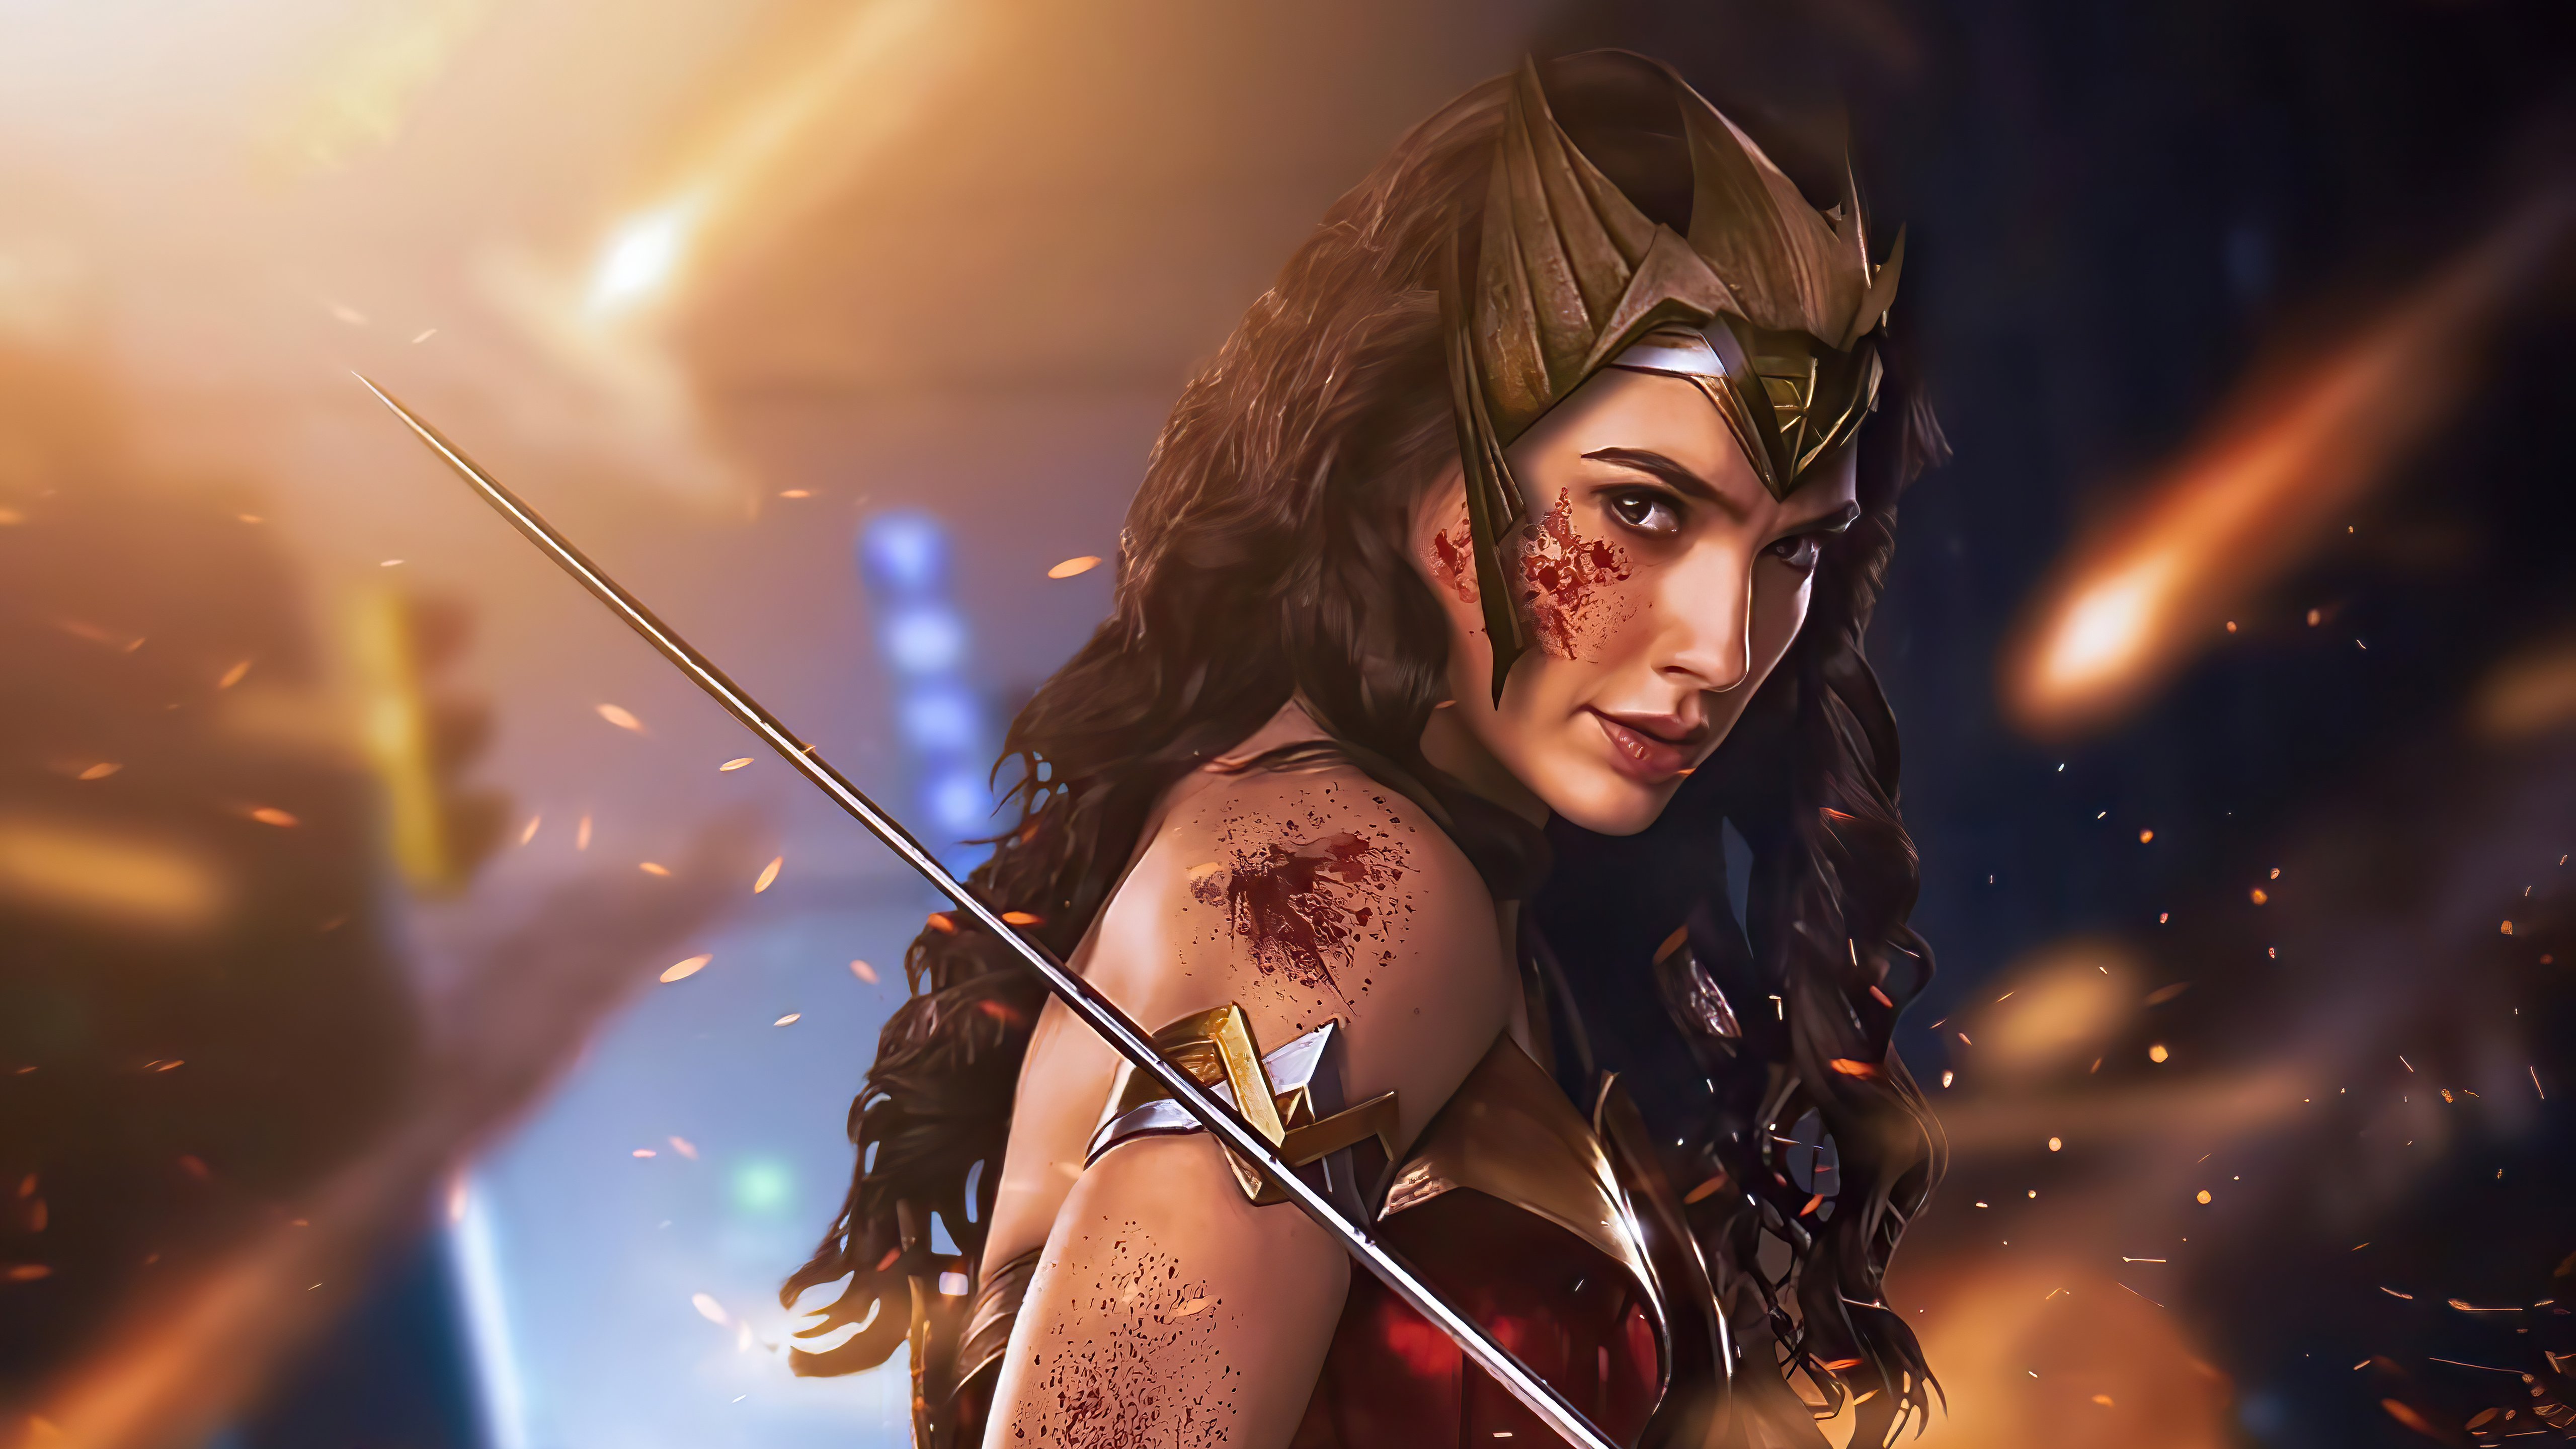 Wallpaper Wonder Woman with fight marks